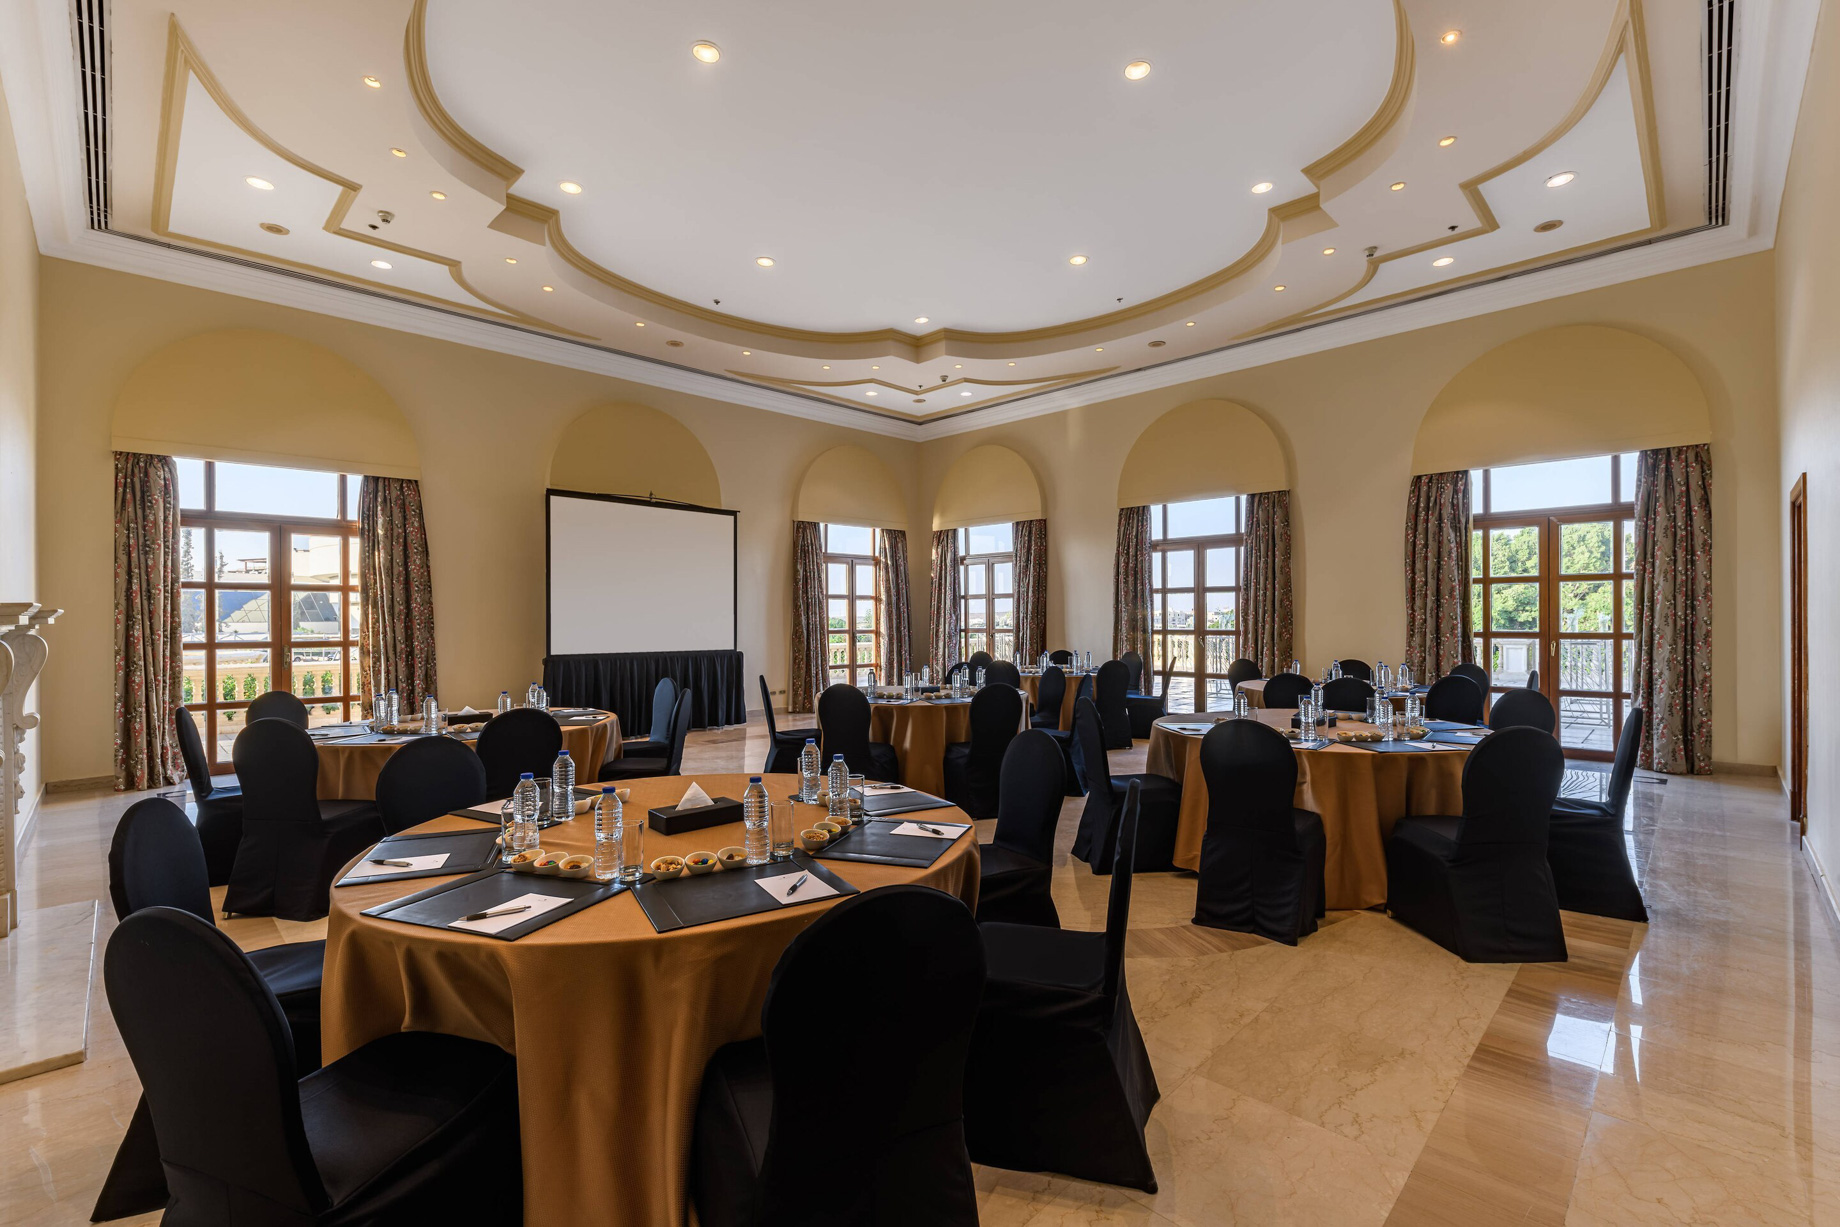 JW Marriott Hotel Cairo - Cairo, Egypt - Clubhouse Victoria Meeting Room Banquet Setup